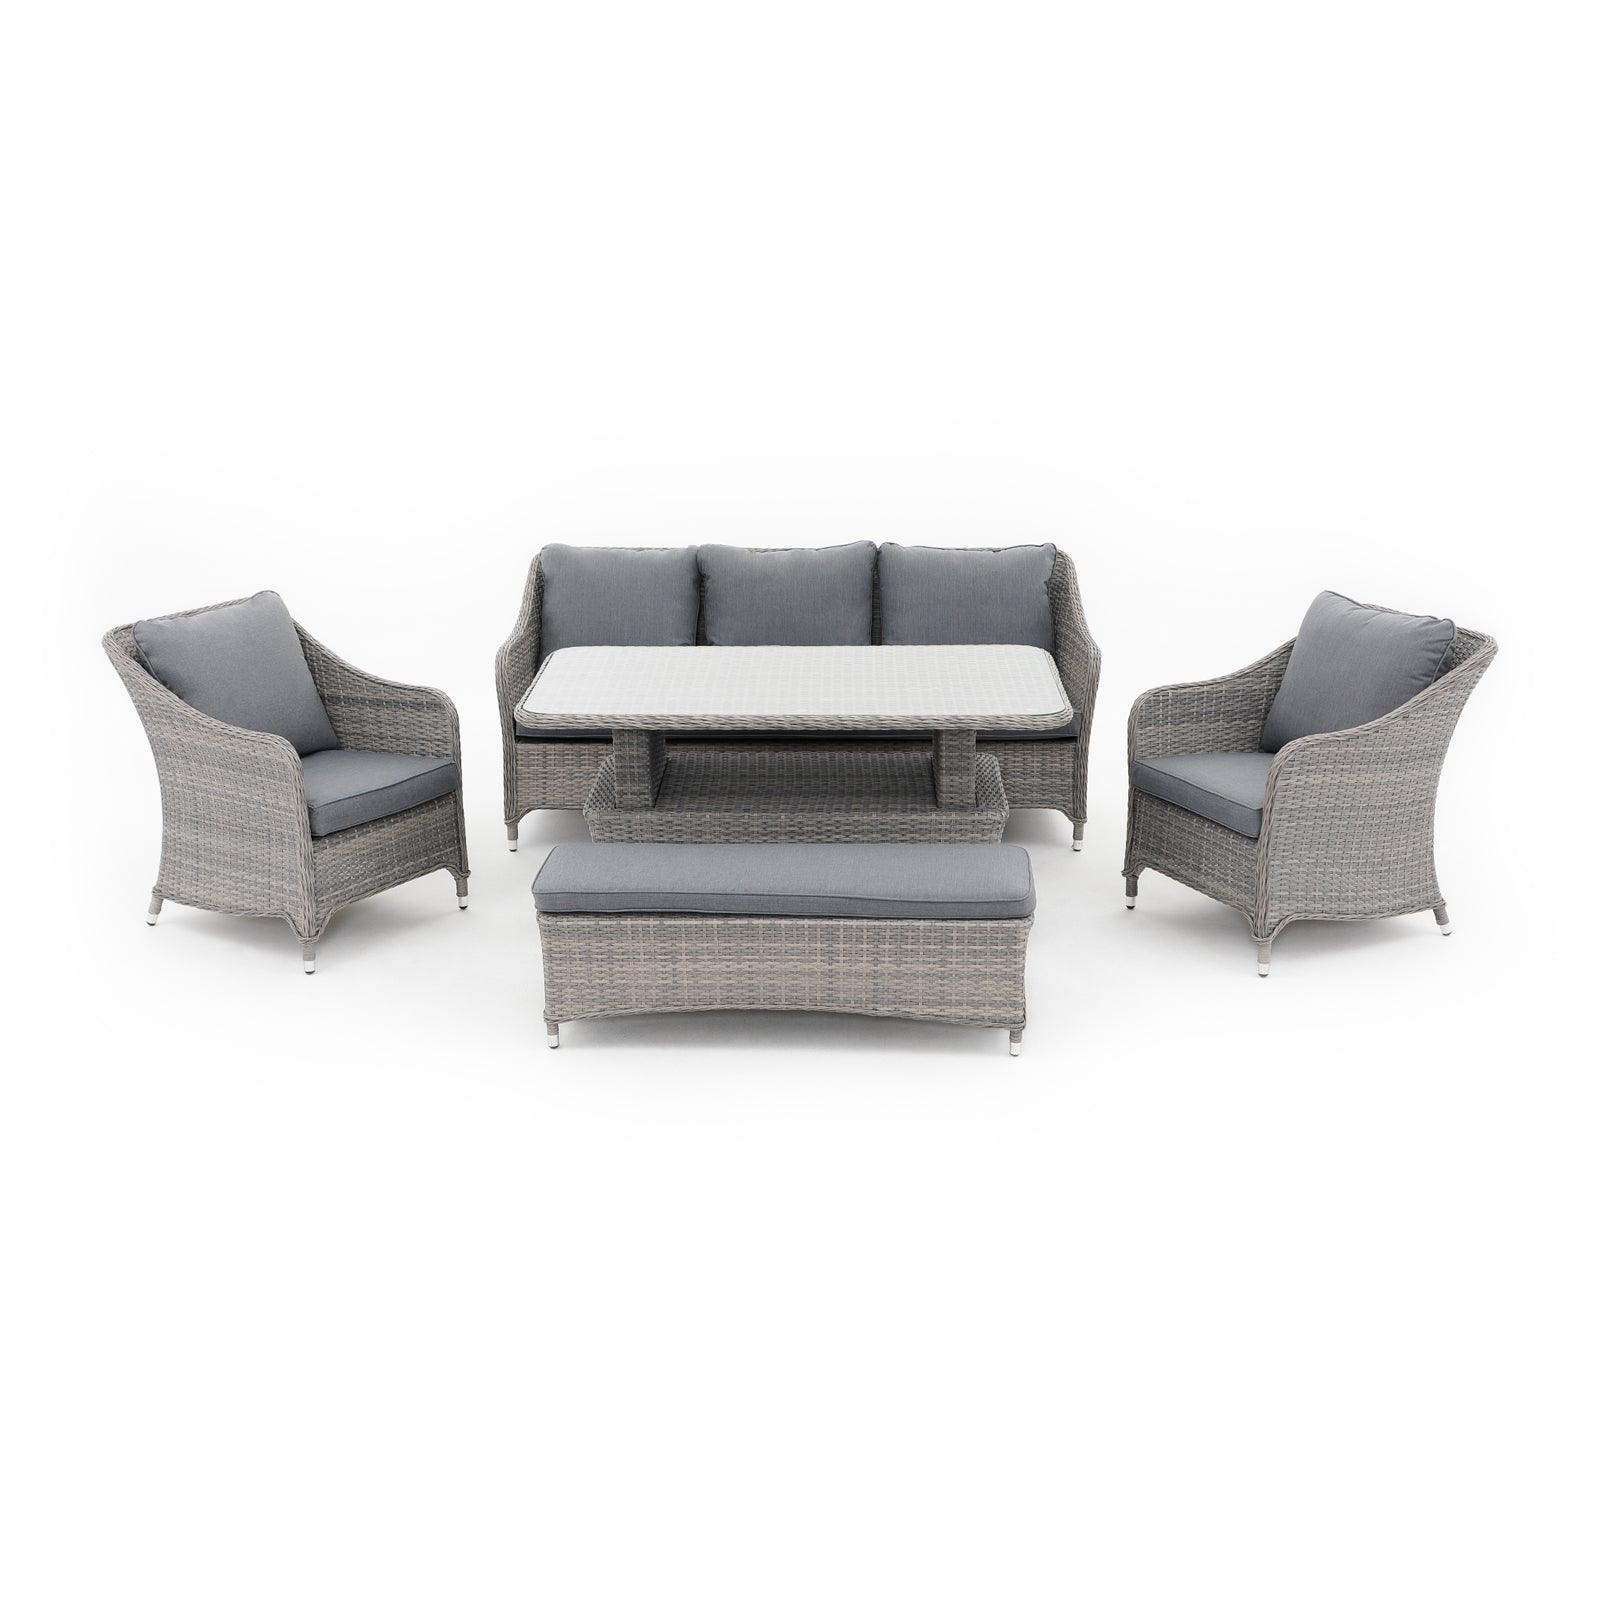 Irati 5-Piece grey wicker outdoor dining set with aluminum frame, grey cushions, 1 three-seater sofa, 2 dining chairs , 1 ottoman, 1 lift top table - Jardina Furniture - 2